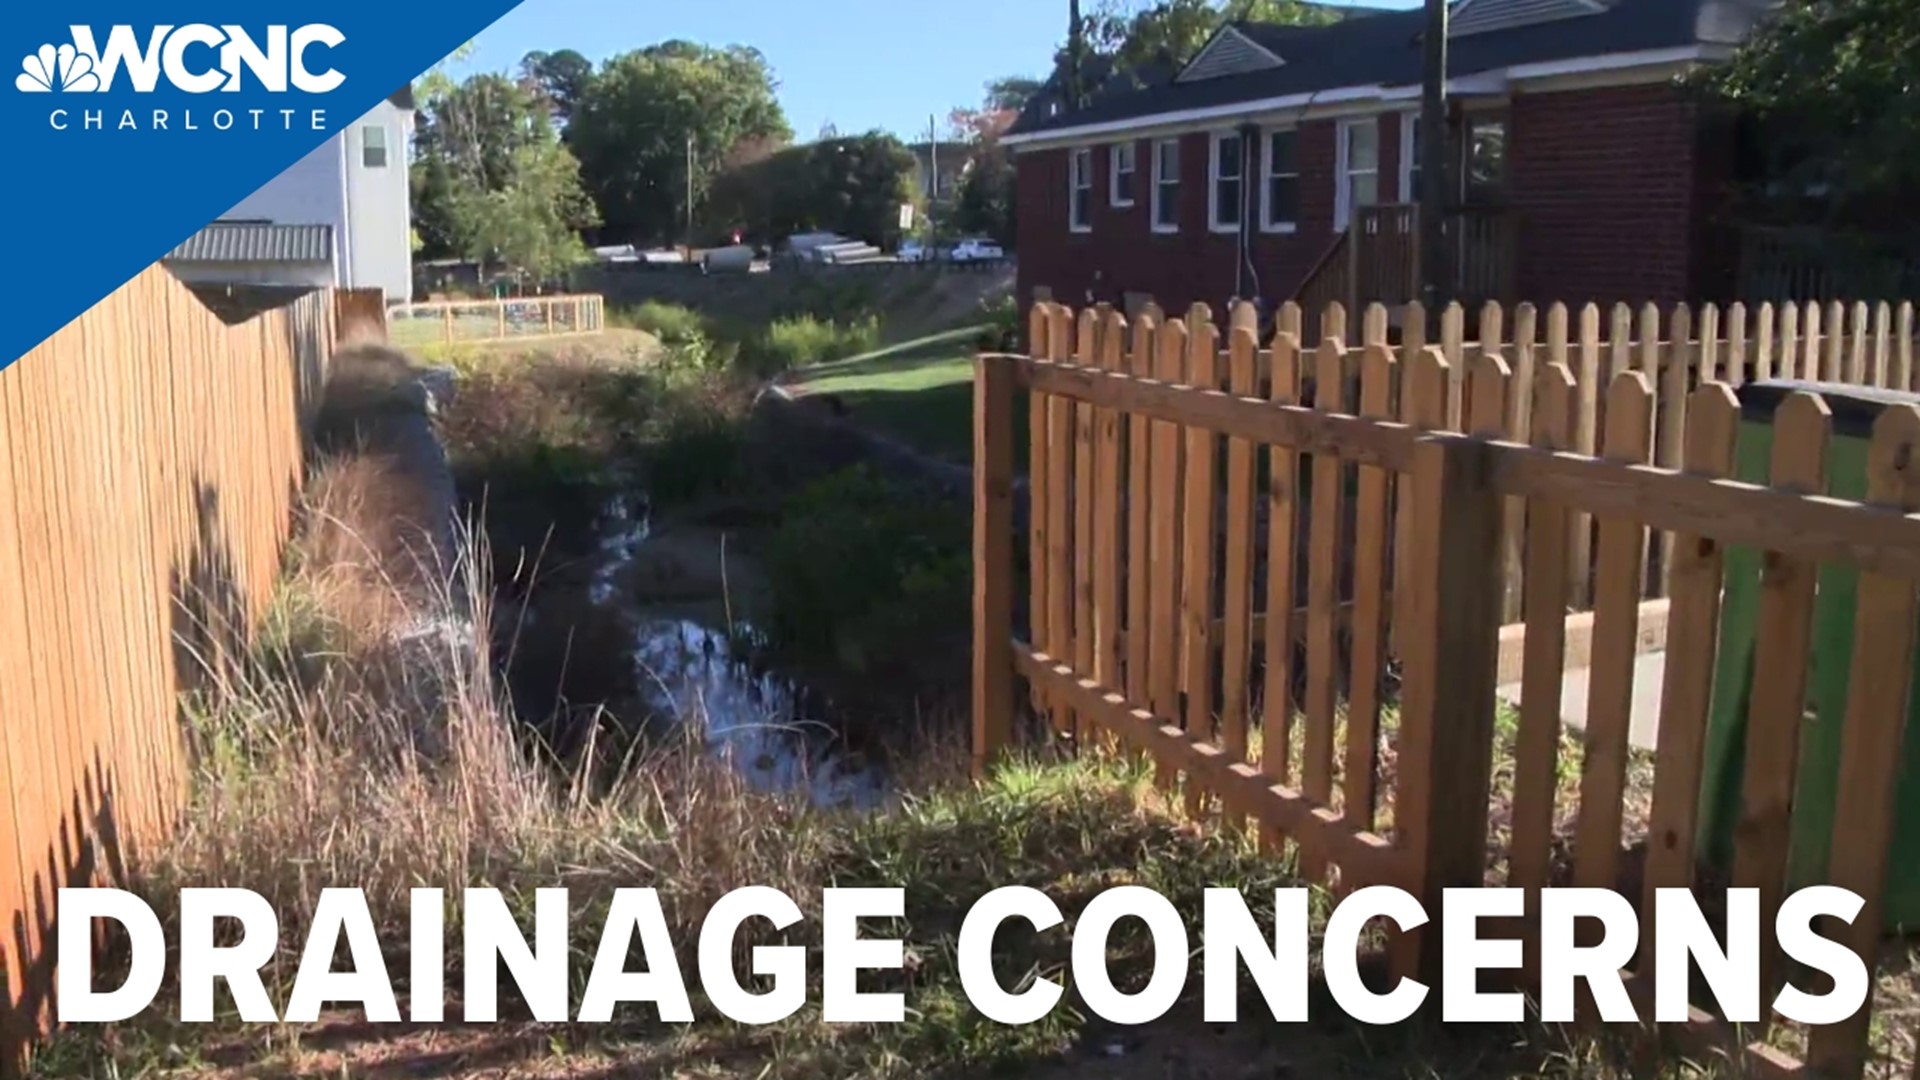 The storm drainage improvement project aims to reduce flooding and erosion, but residents say the situation has become worse.